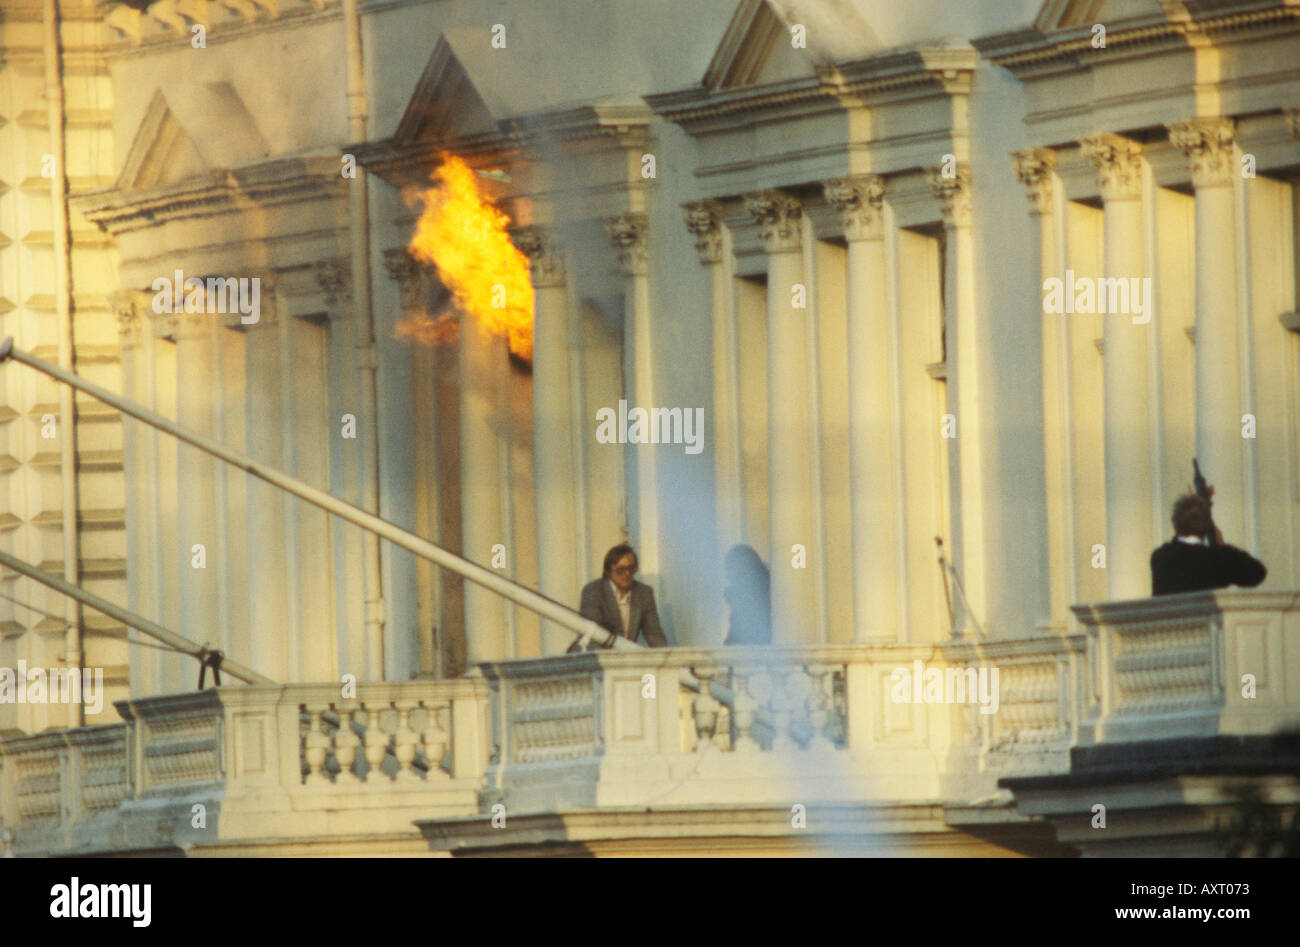 Iranian Embassy siege May 5th 1980 London UK 1980s Simon 'Sim' Harris escaping from the building. England  HOMER SYKES Stock Photo